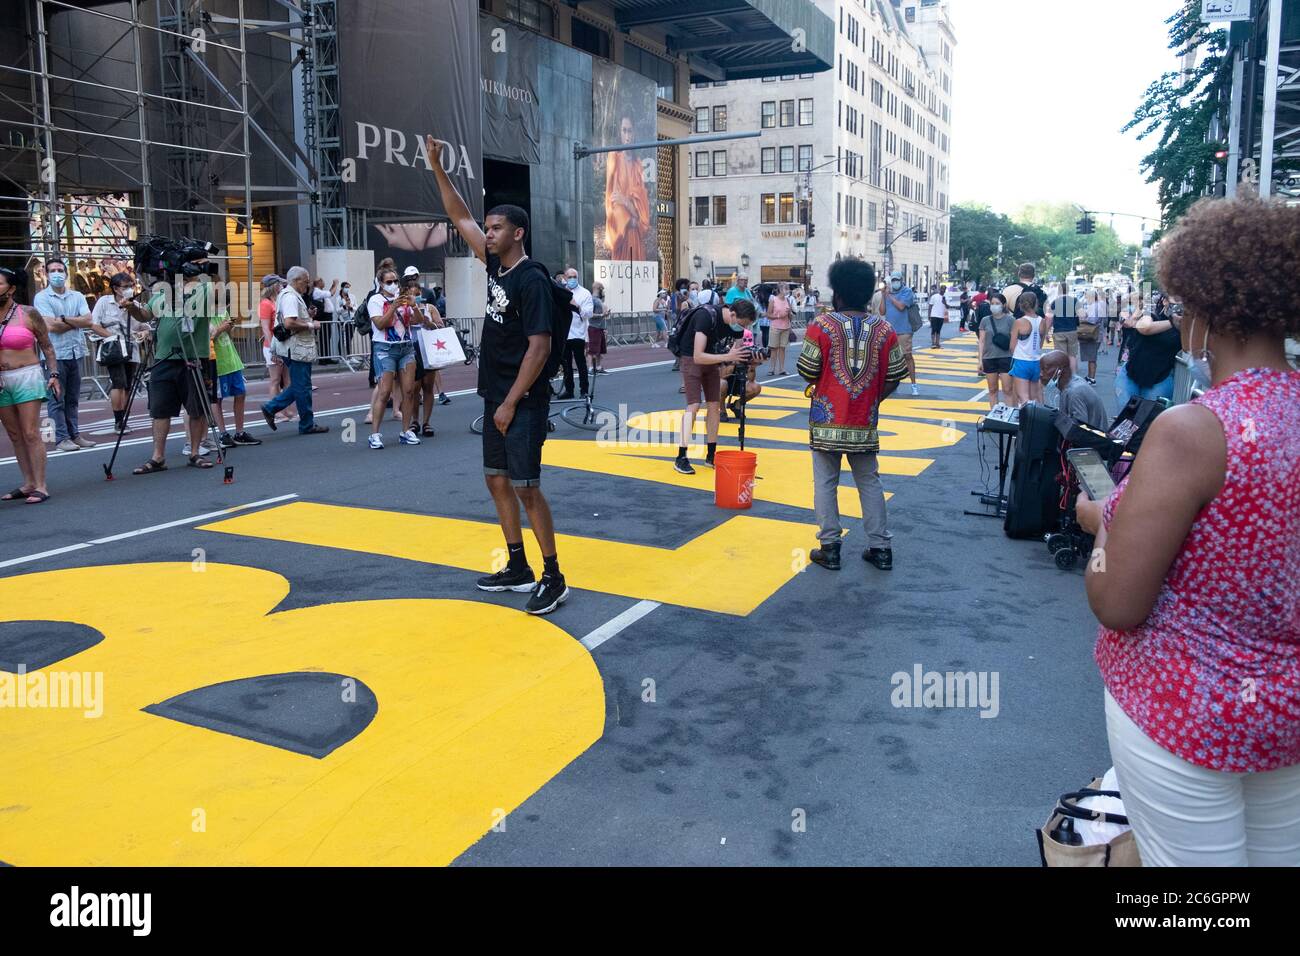 New York, United States. 08th July, 2020. Protesters taking pictures on a Black Lives Matter mural that was painted on the street in front of Trump Tower in Manhattan.As New York City enters phase 3 of reopening retail stores for indoor shopping, restaurants have been postponed for indoor dinning. Meanwhile Black Lives Matter protests continue in the city as the Mayor along with a group of people painted a large Black Lives Matter mural in front of Trump Tower on 5th Ave. Credit: SOPA Images Limited/Alamy Live News Stock Photo